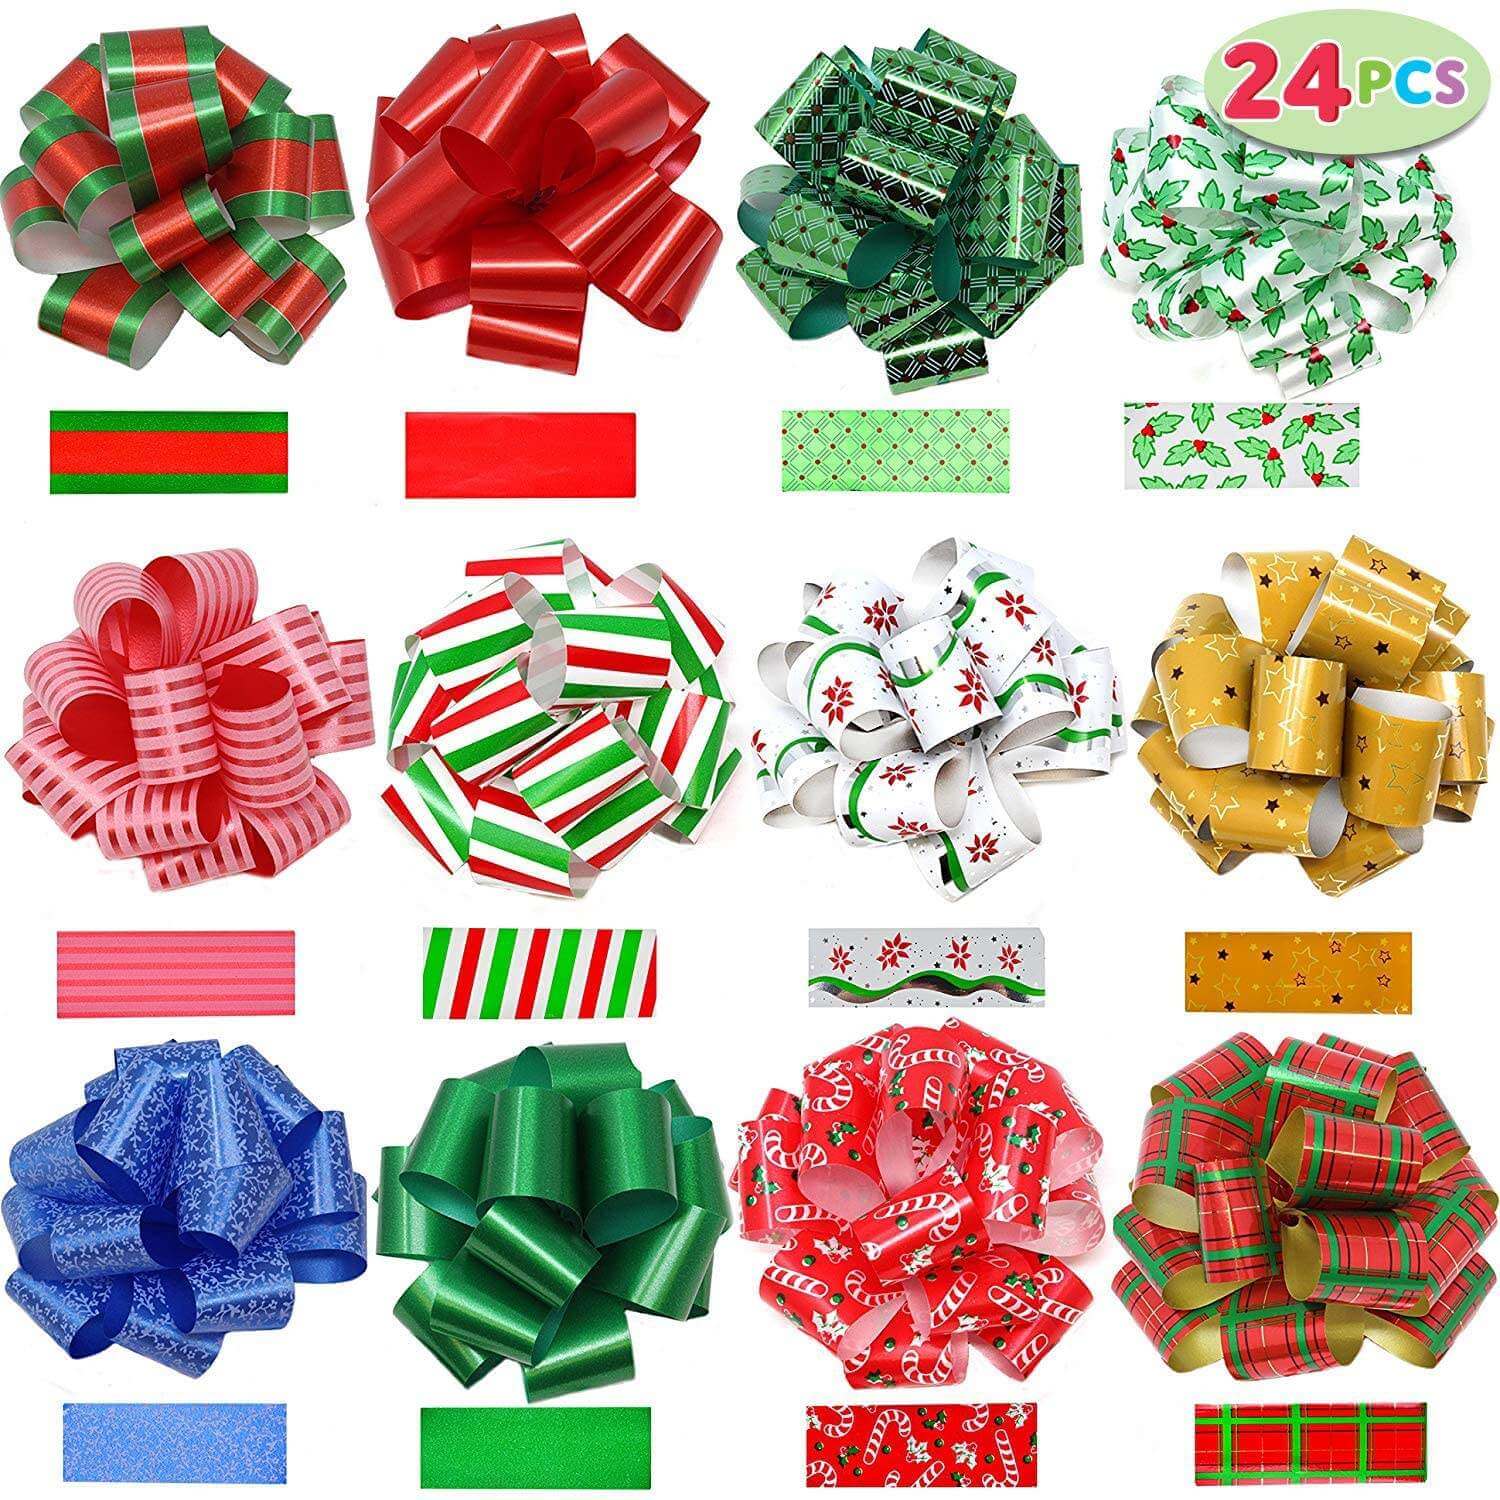 Colorful Curling Ribbon Bows